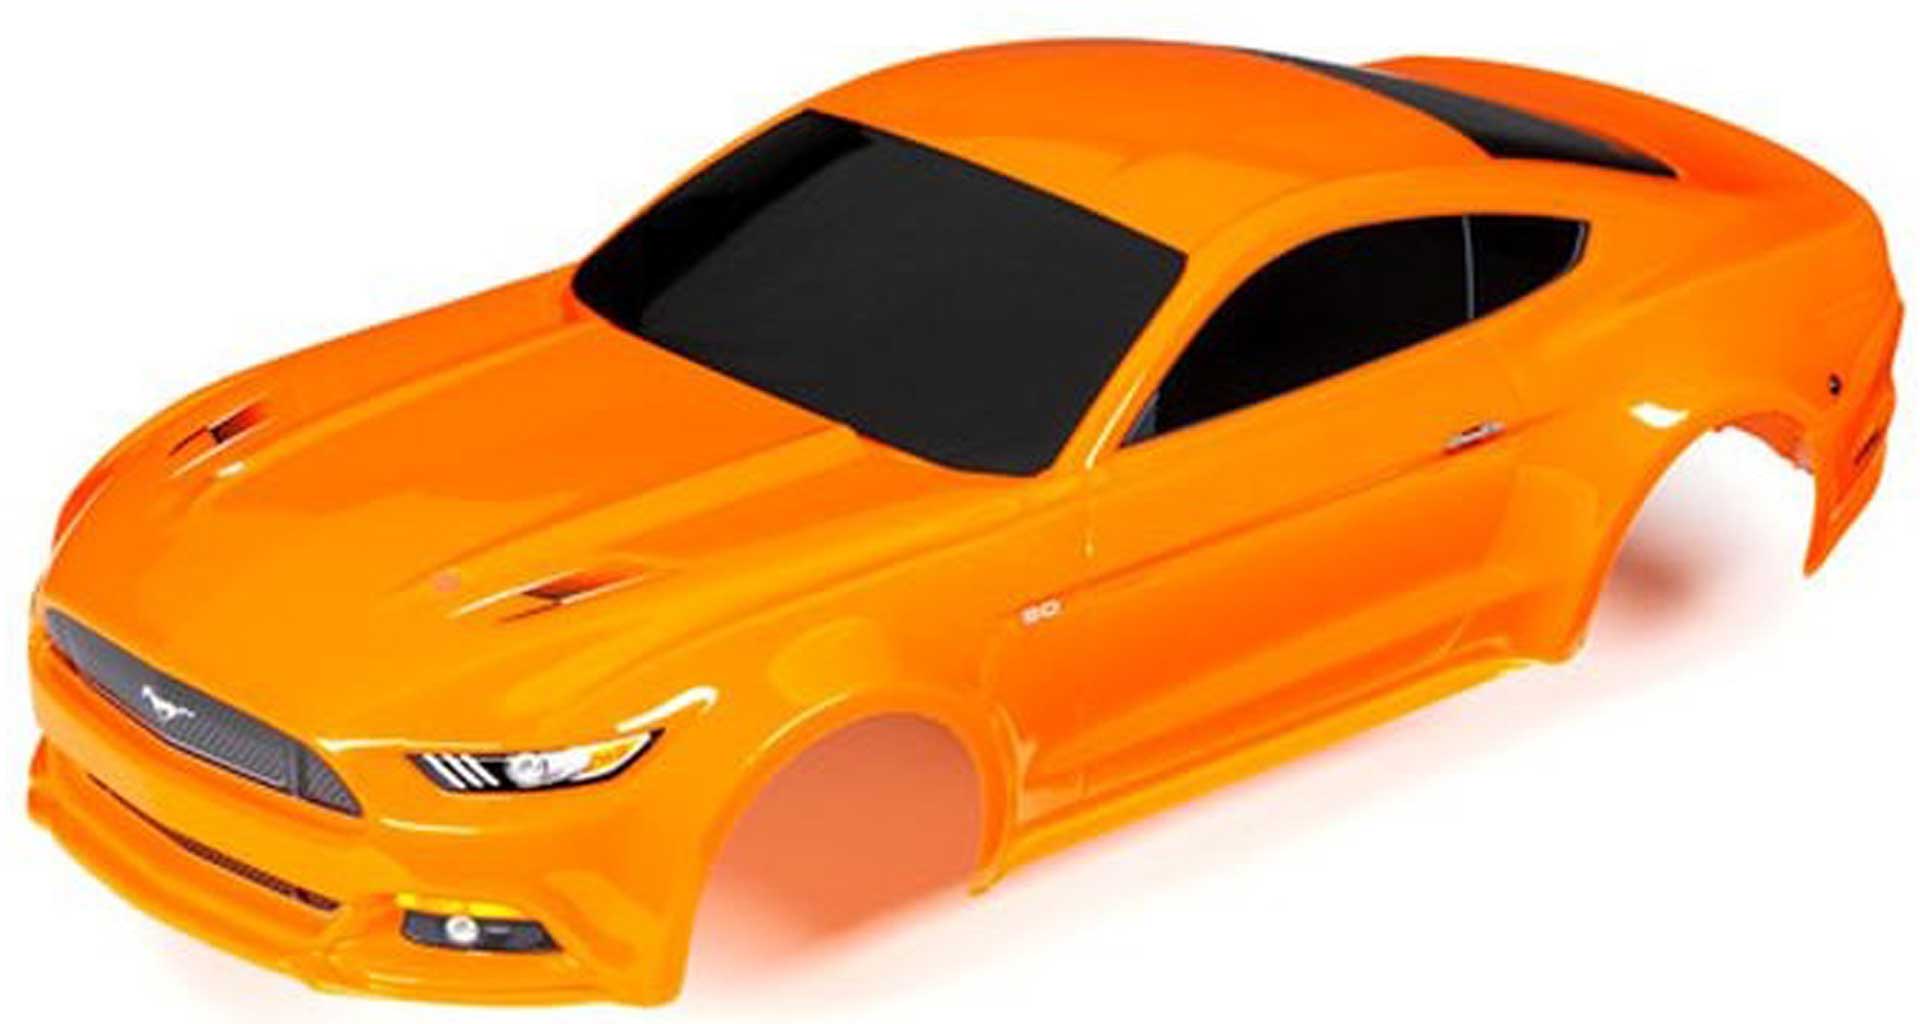 TRAXXAS Body Ford Mustang, orange (painted + sticker)